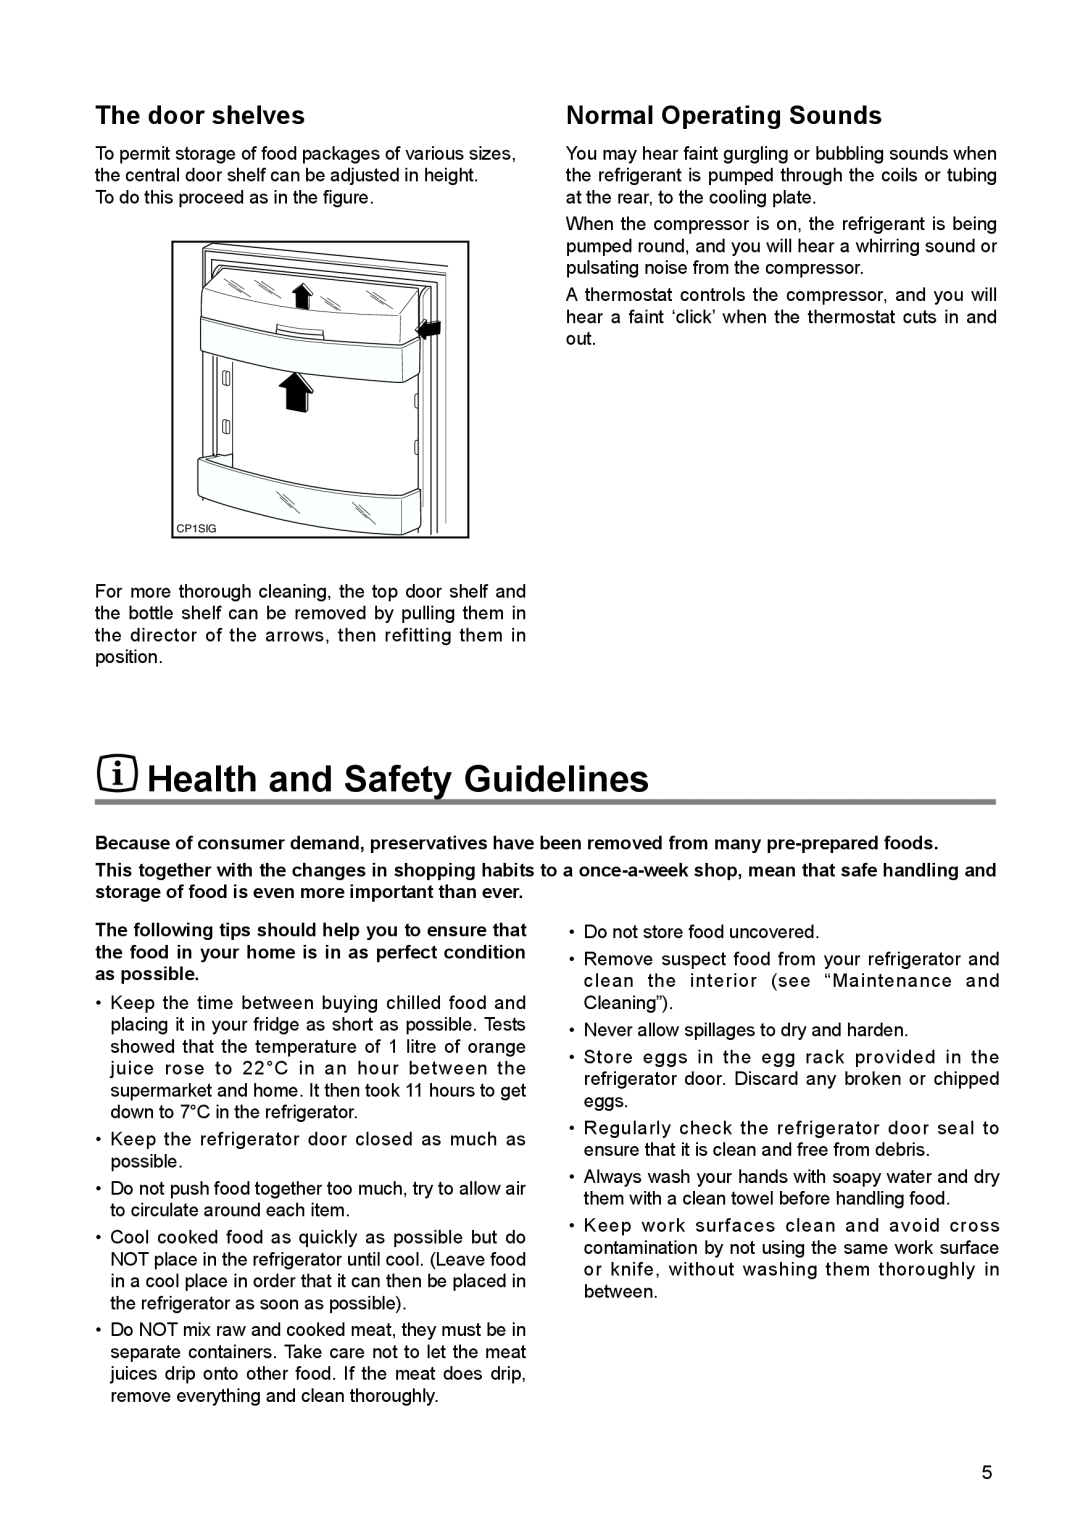 Tricity Bendix TBUL 140 installation instructions Health and Safety Guidelines, The door shelves, Normal Operating Sounds 